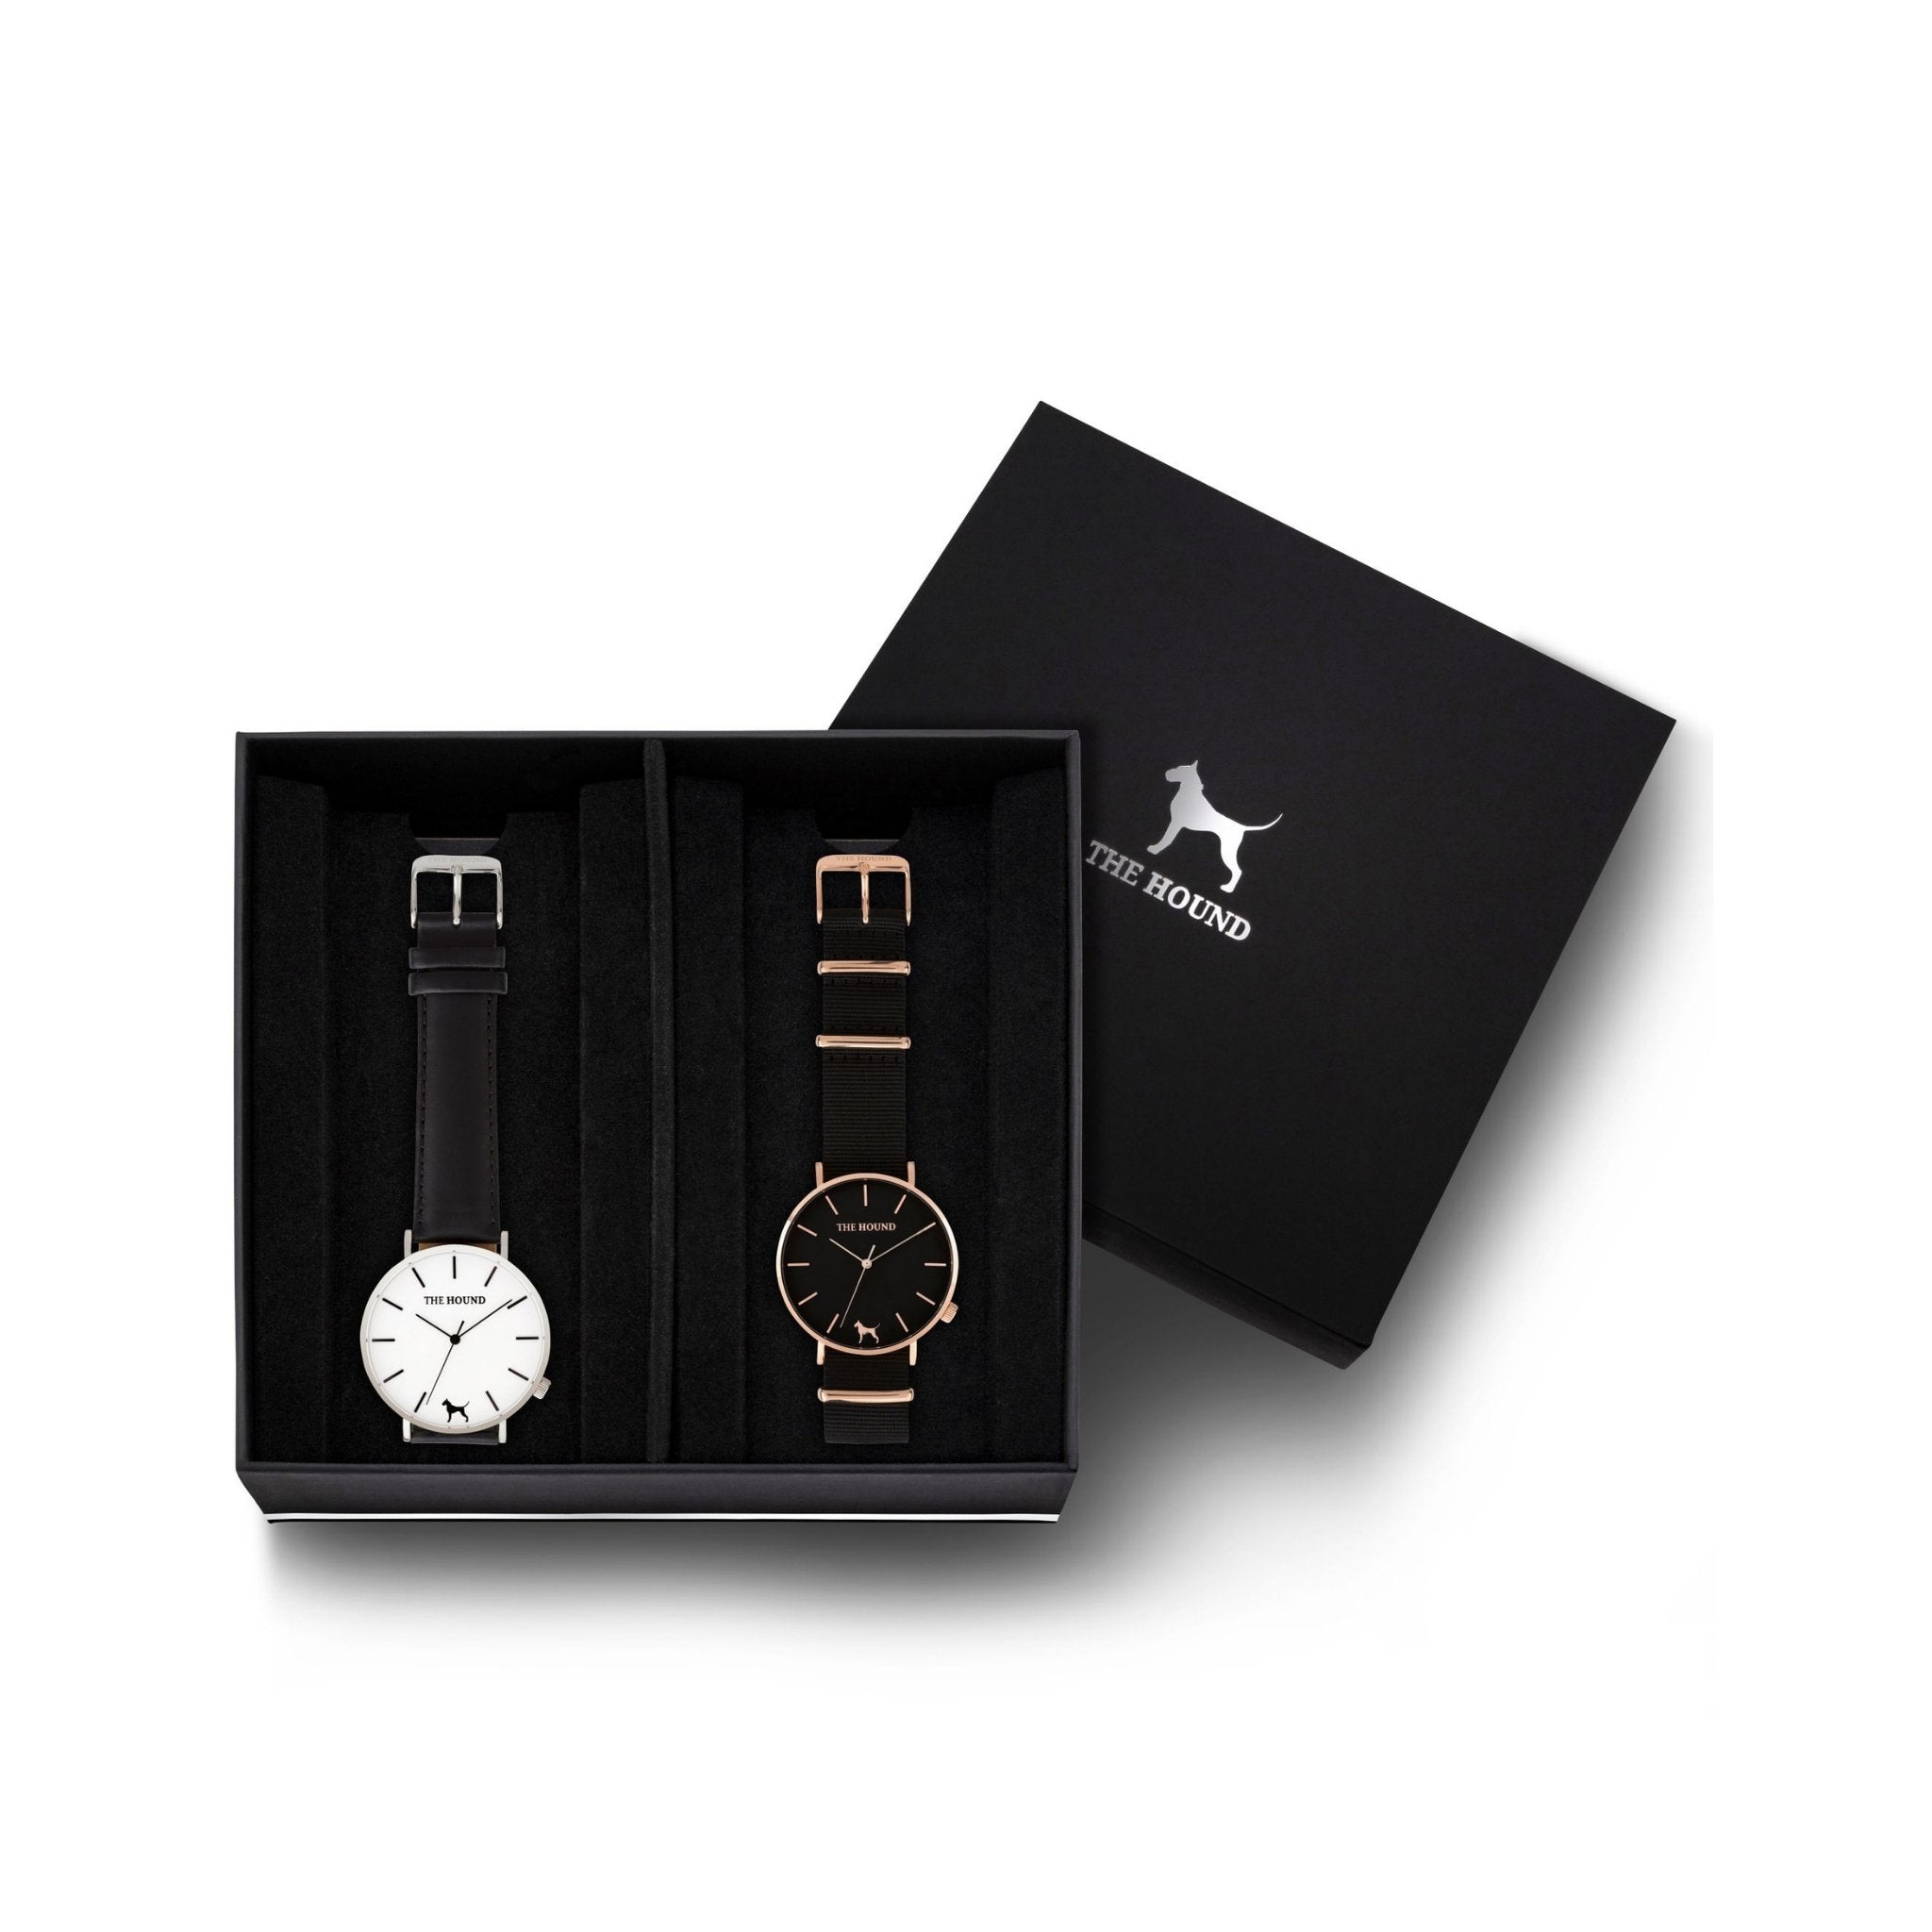 Custom gift set - Silver and white watch with stitched black genuine leather band and a rose gold and black watch with black nato leather band